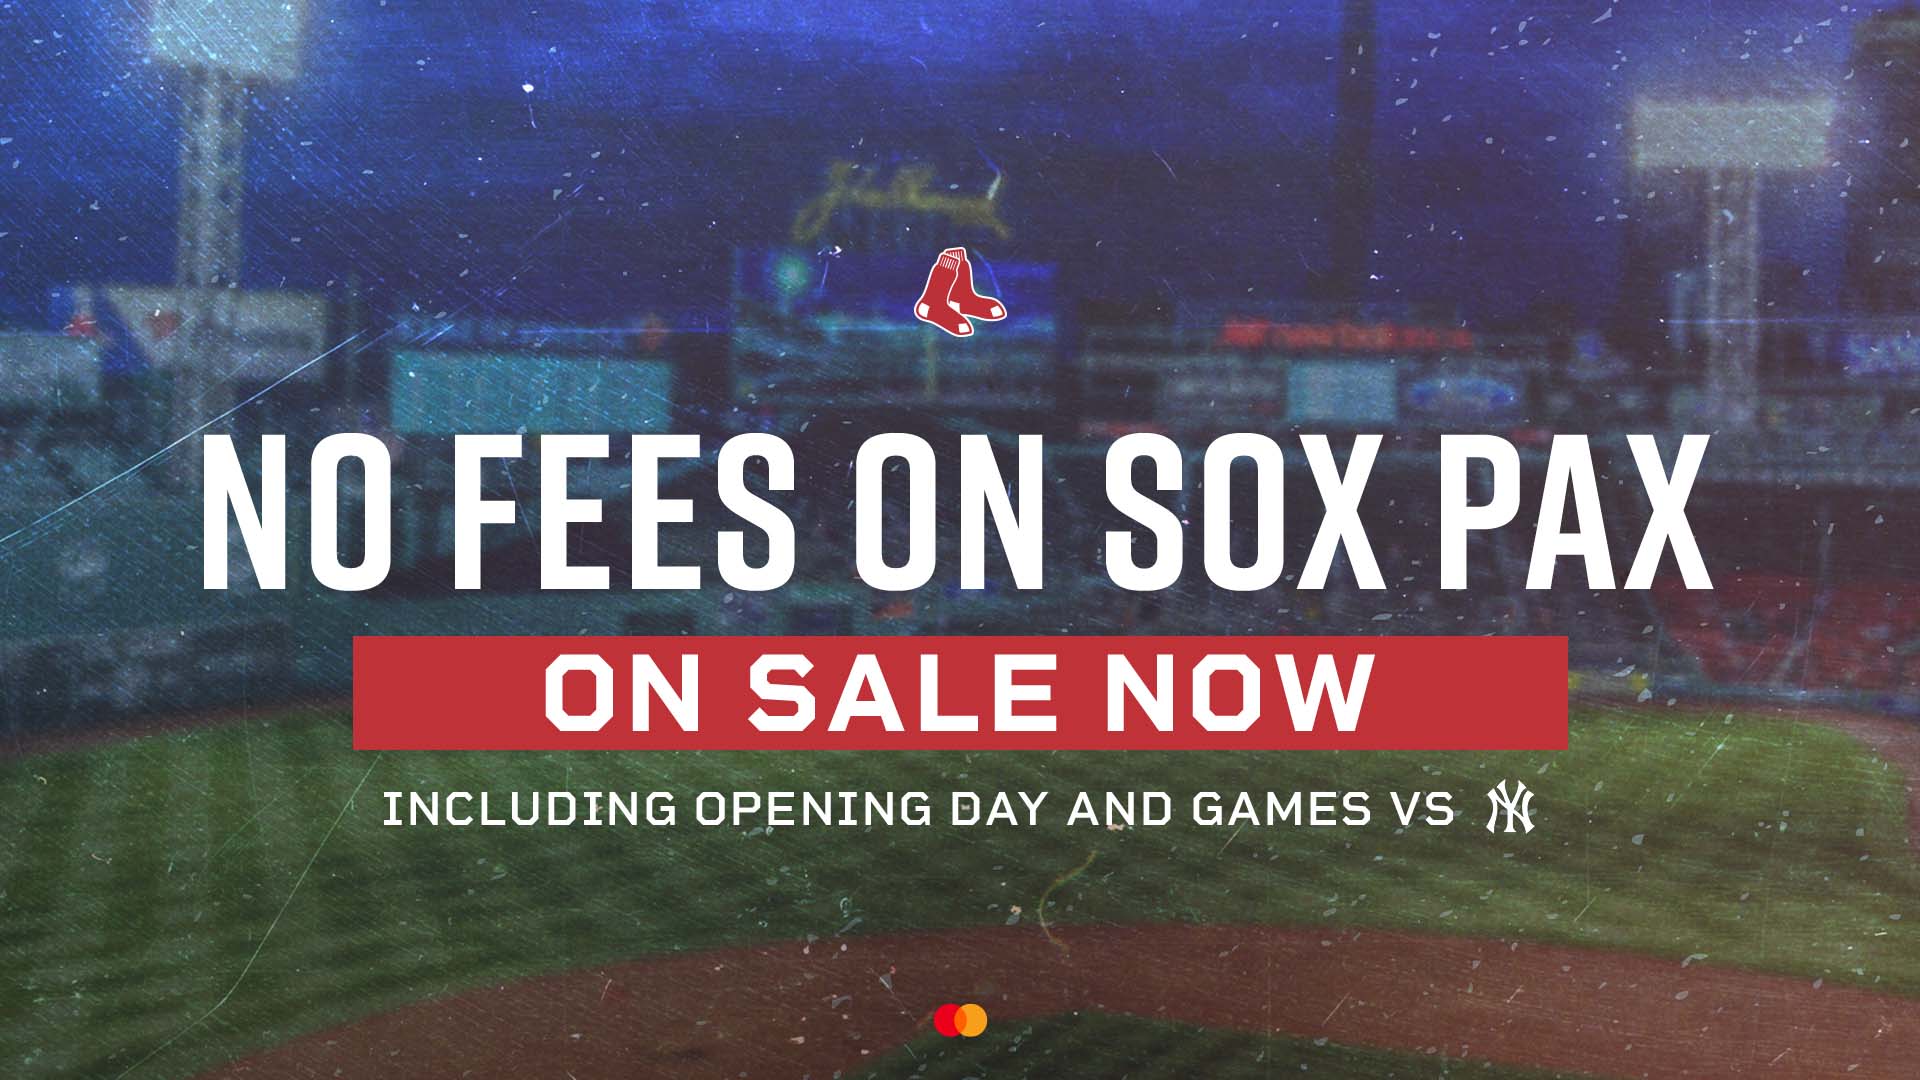 red sox ticket prices 2022